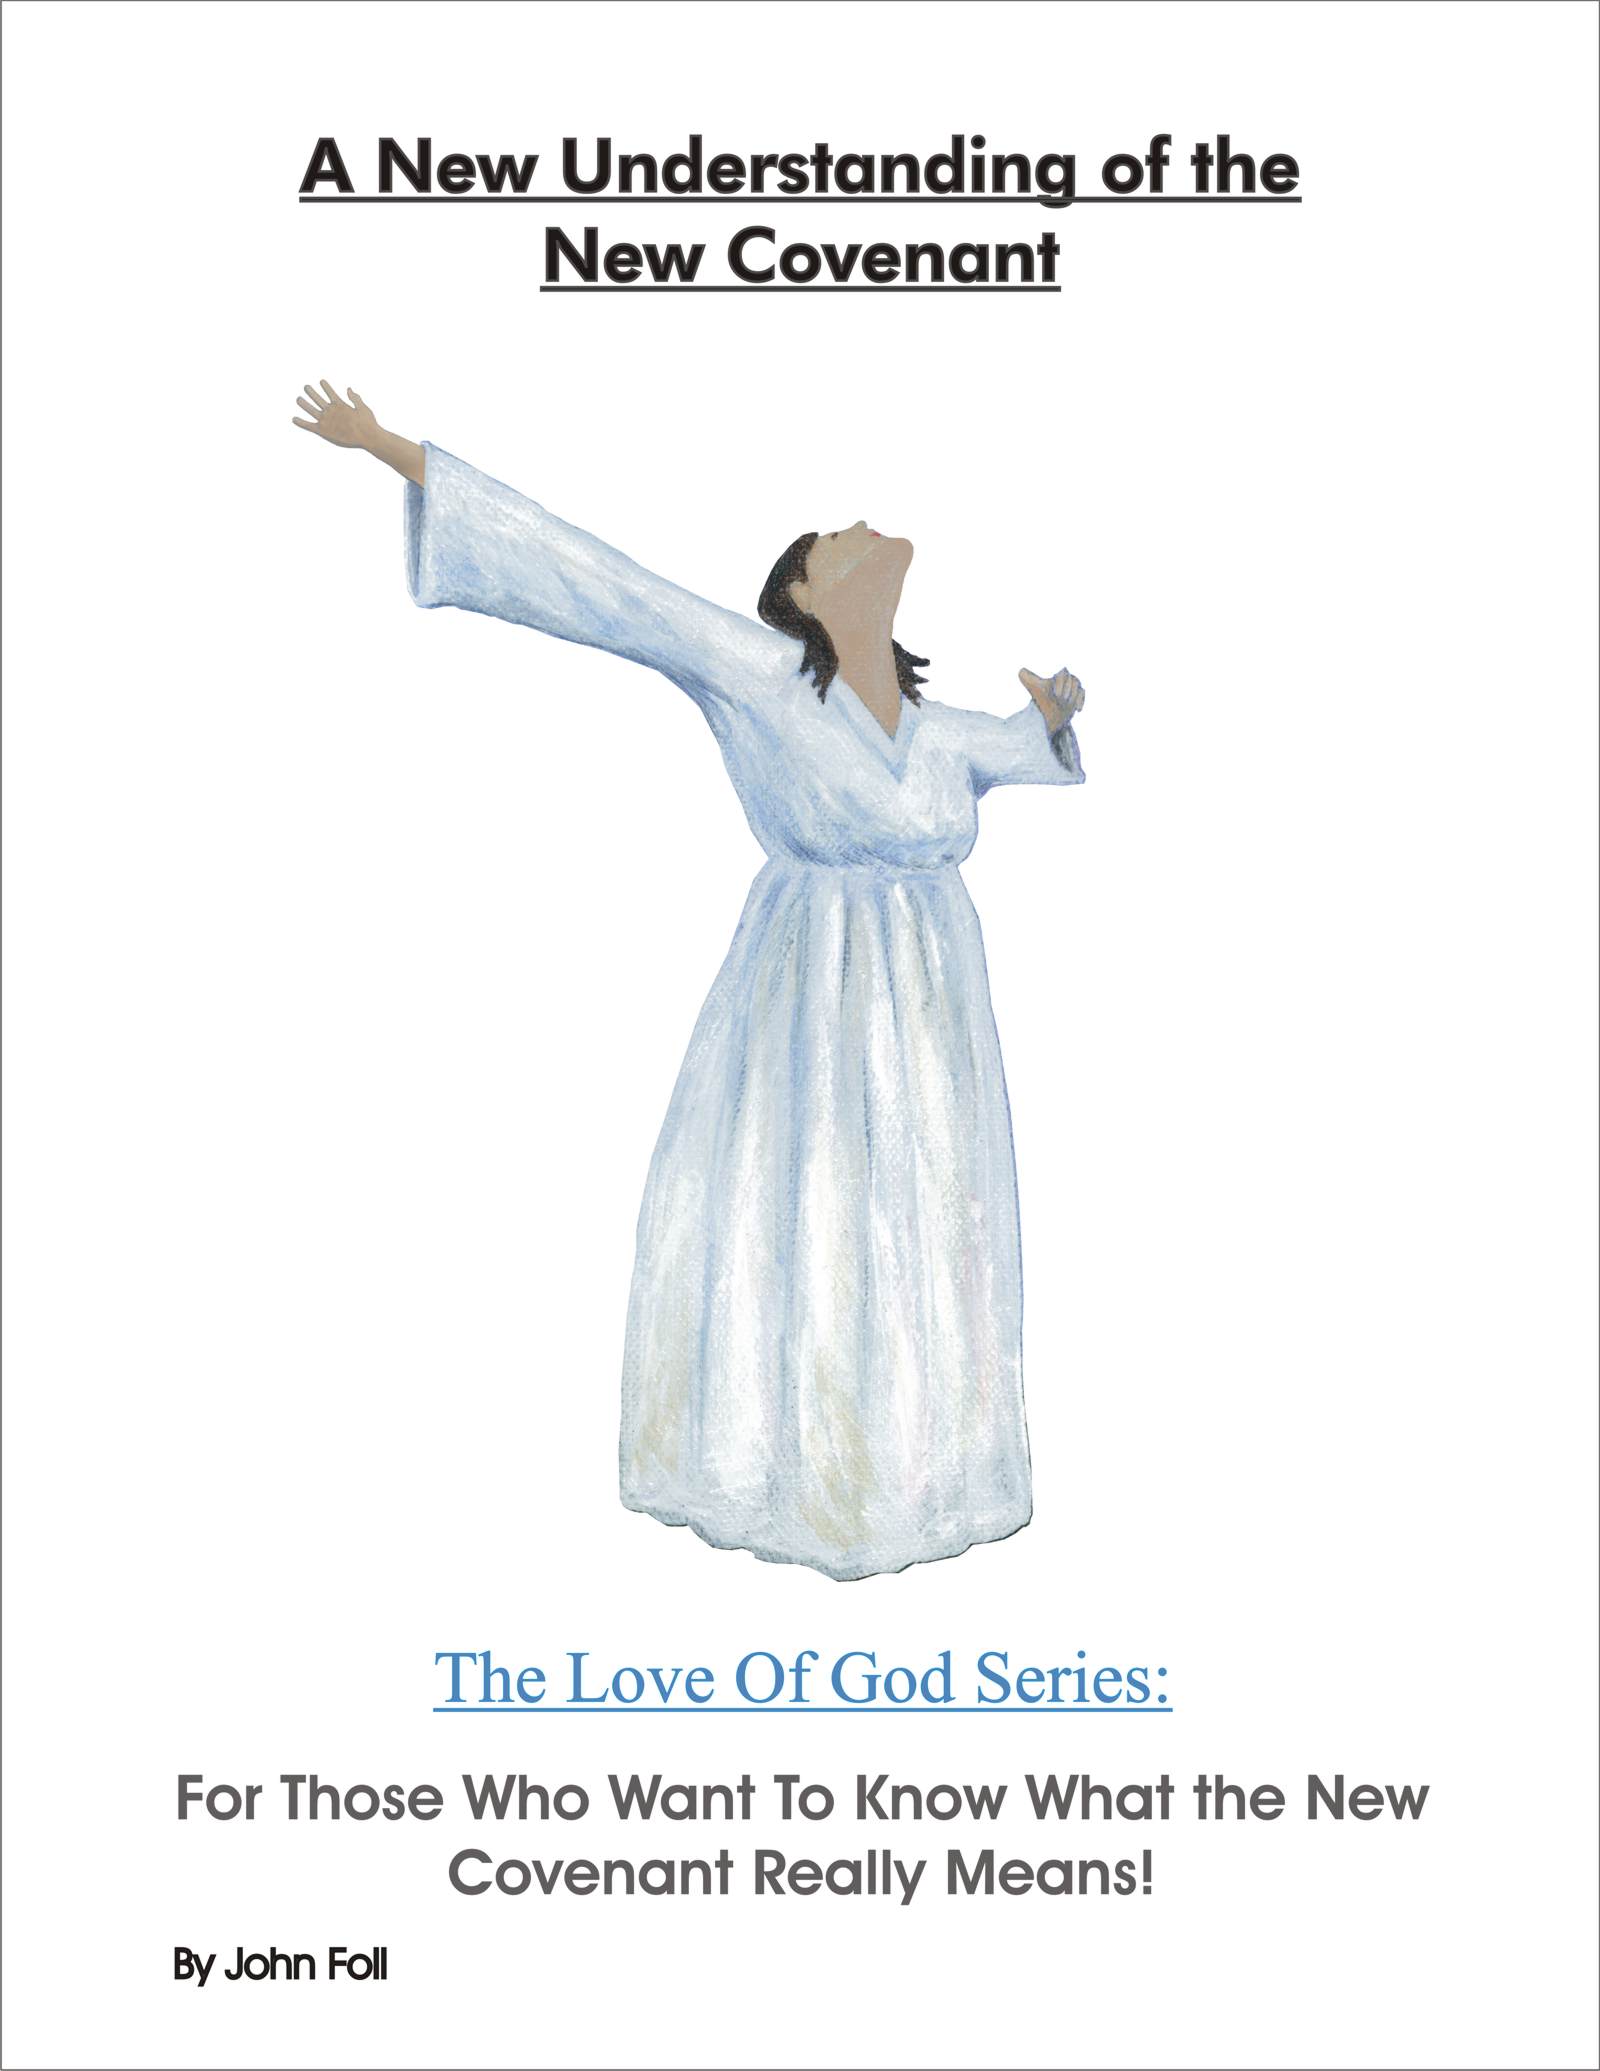 A New Understanding of the New Covenant